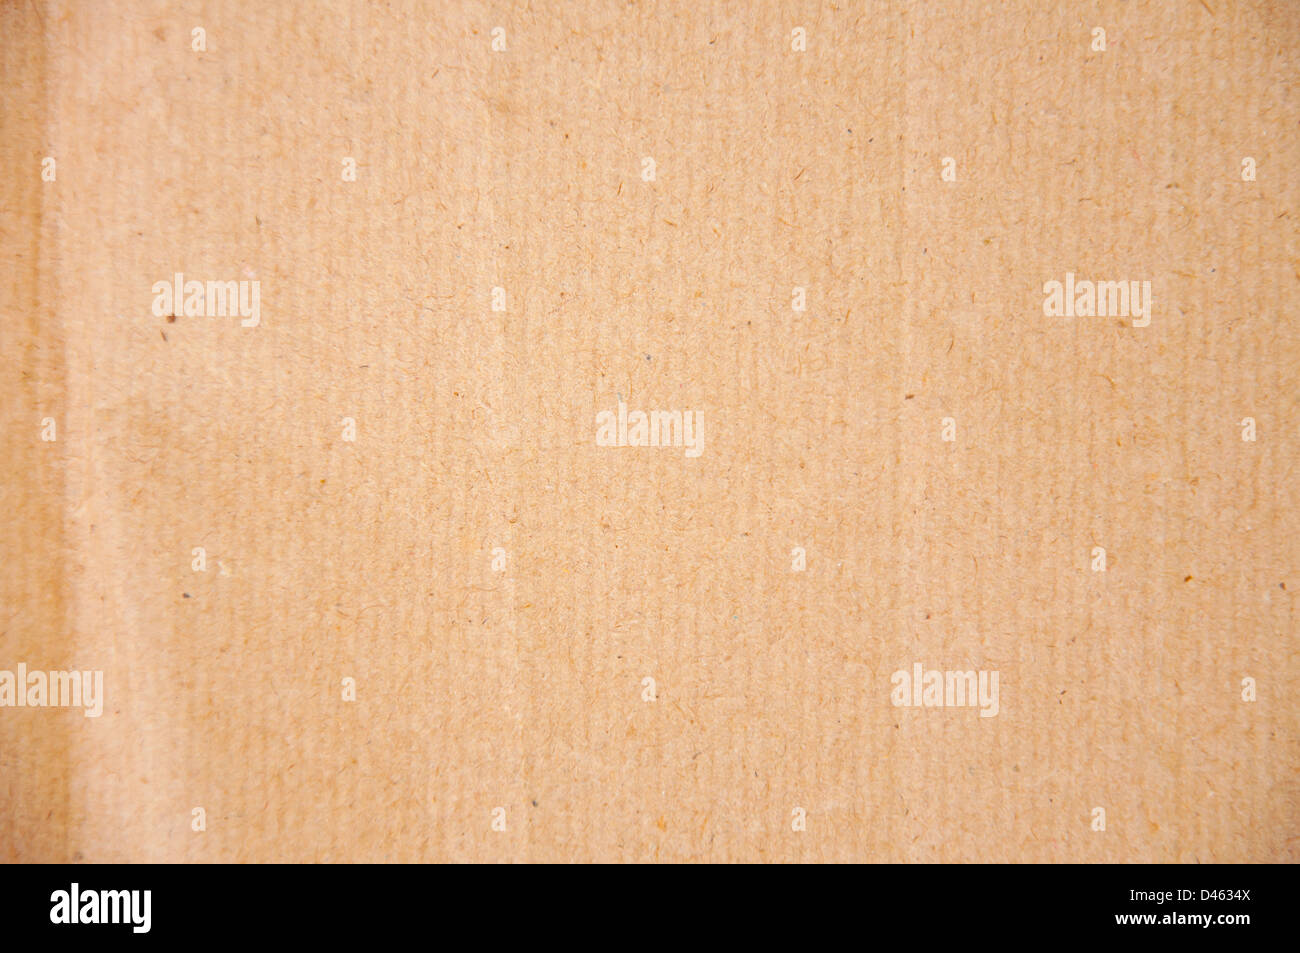 old paper texture background Stock Photo